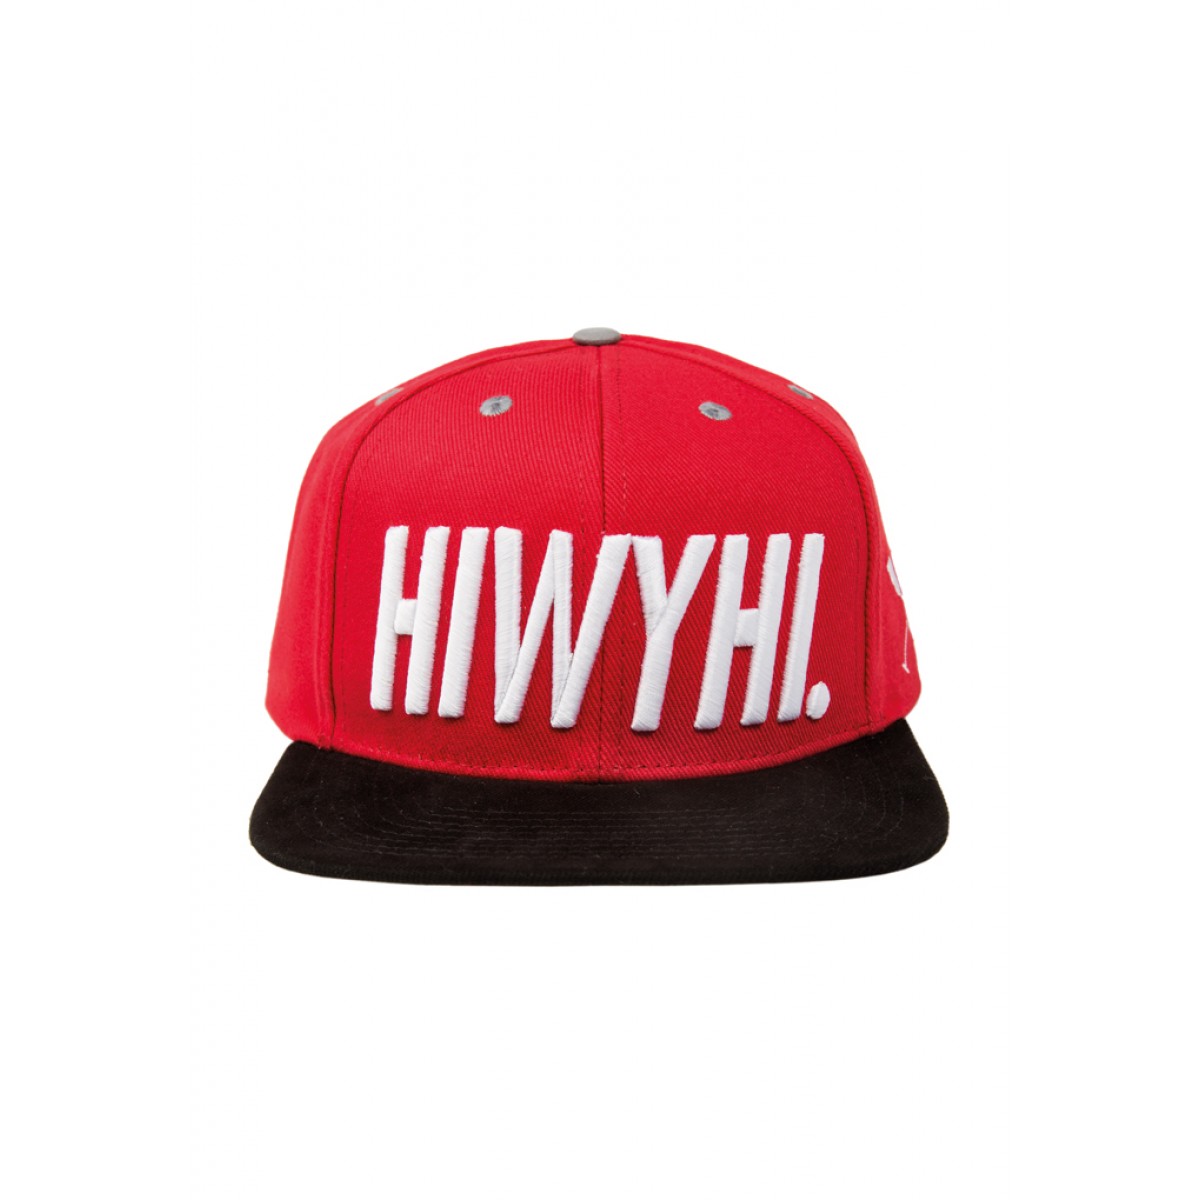 HOME IS WHERE YOUR HEART IS. - HIWYHI. SNAPBACK (RED/BLACK)